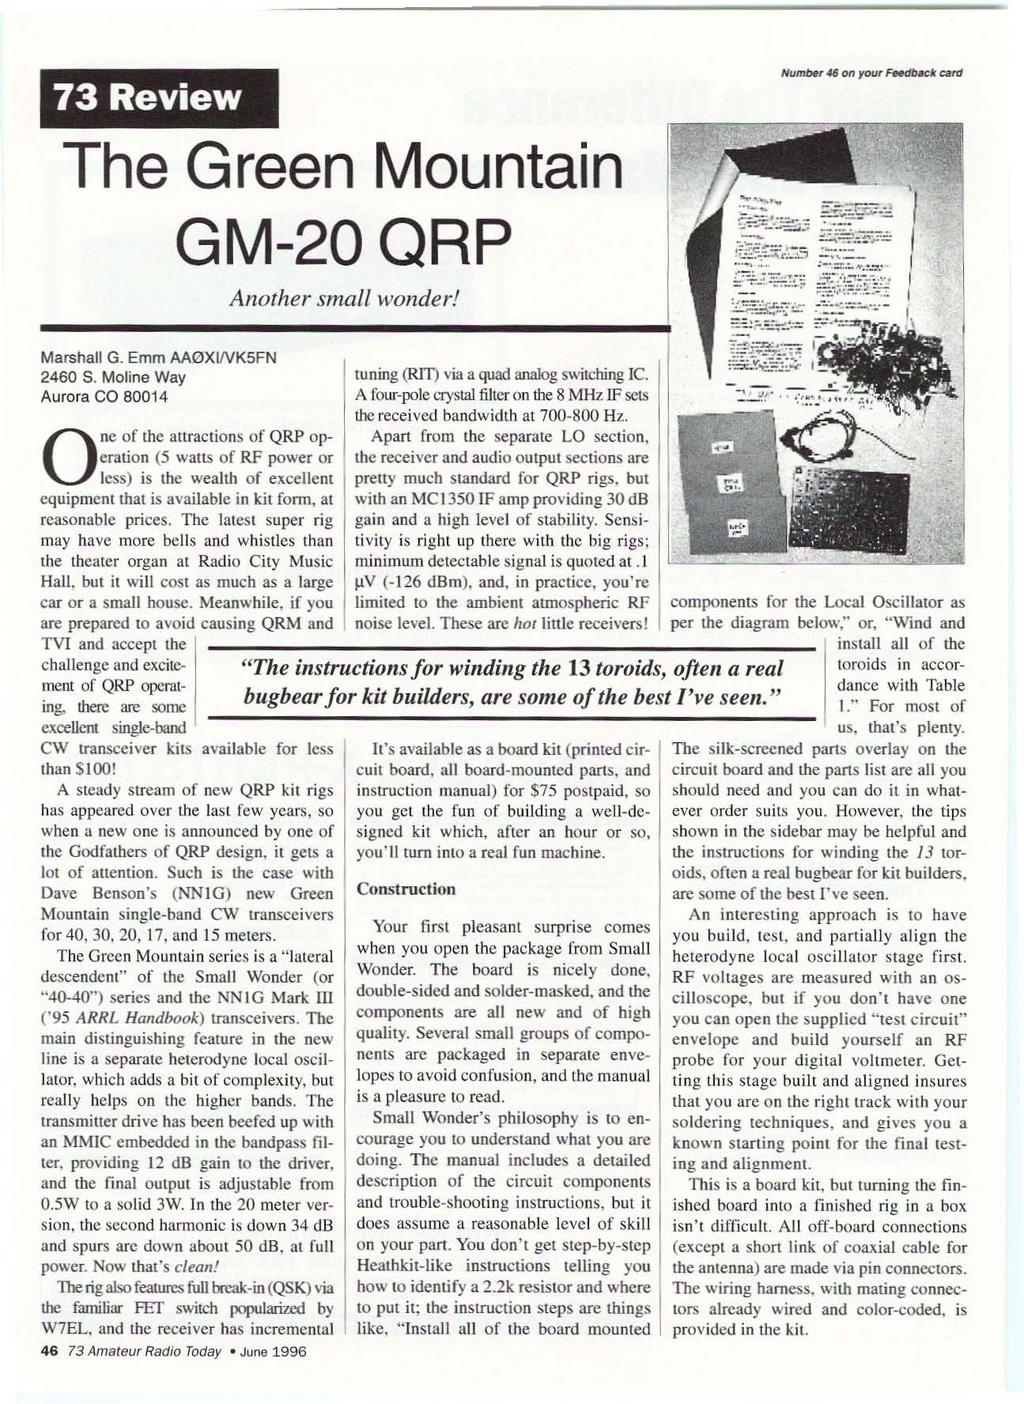 73 Review The Green Mountain GM-20QRP Another small wonder!...~... '... _.. - " ::.:--_-:_-~.:: - :-:~'::'t:.,',-:::, --'. -,..._,.-.- :='~ 4.,.,..~ 1/ =:ZO''"1i... --=..._-... _ - -.,-- :. ~.:.. '.~." _ ;r.